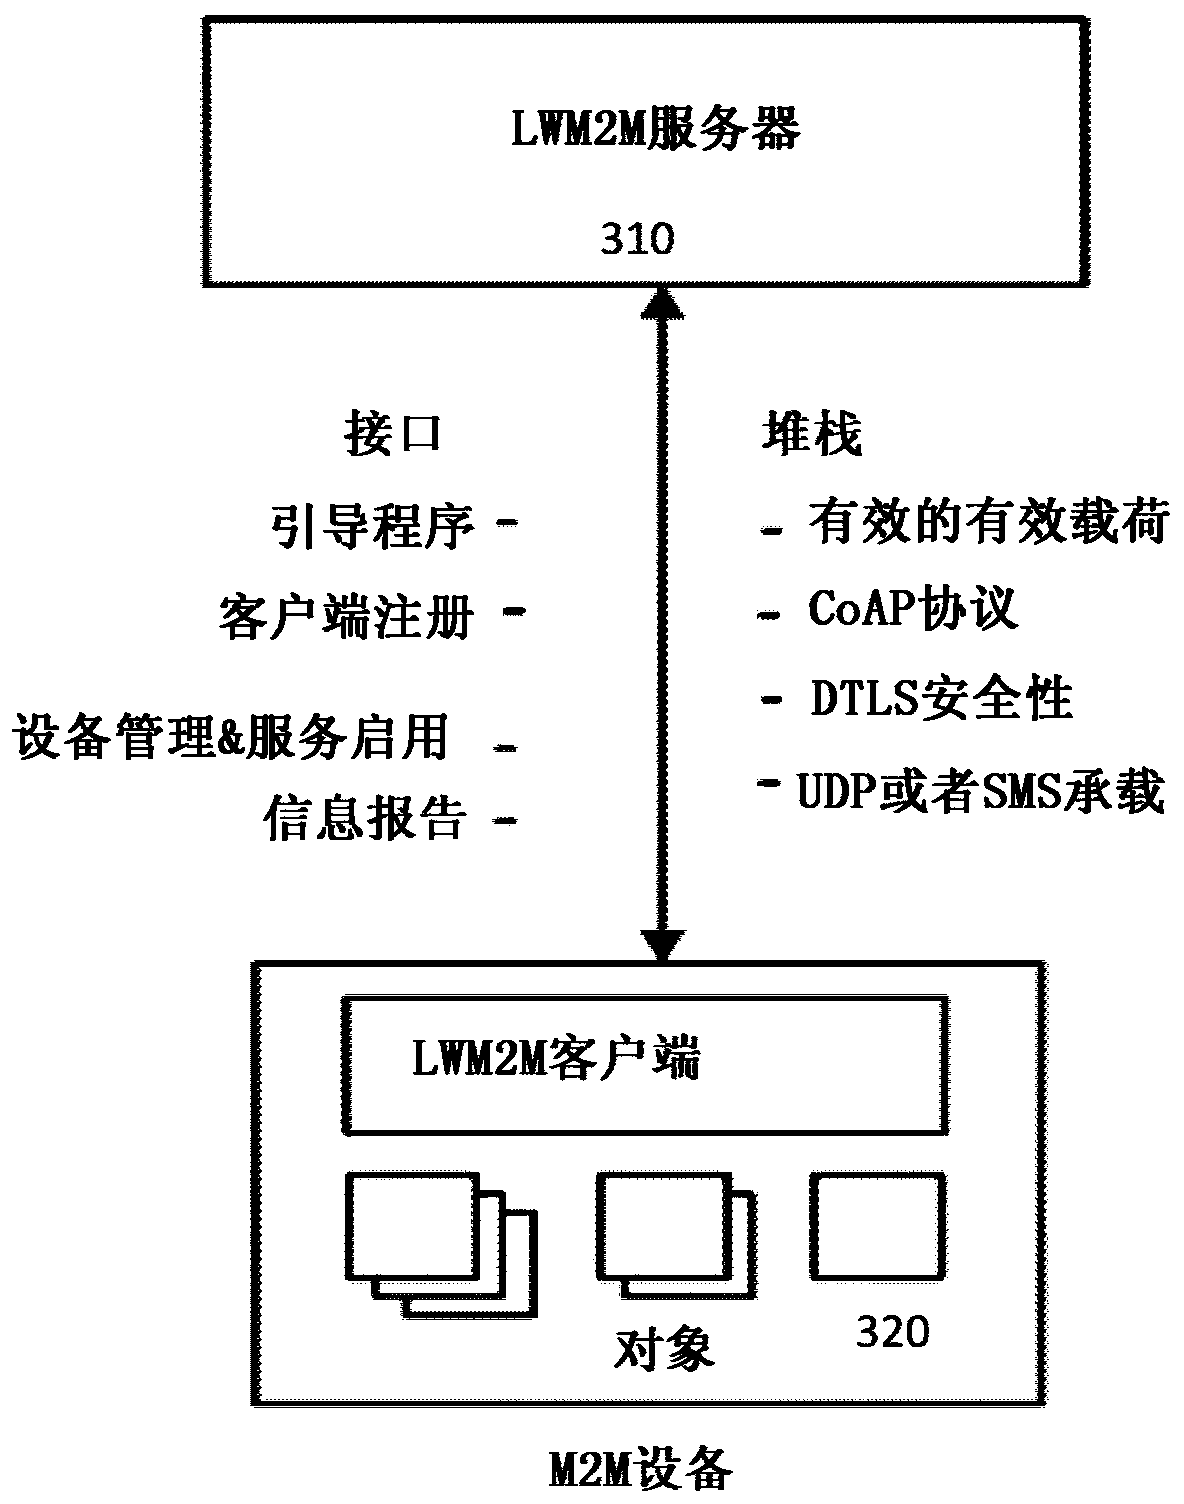 Service capability server/EPC coordination for power savings mode and paging